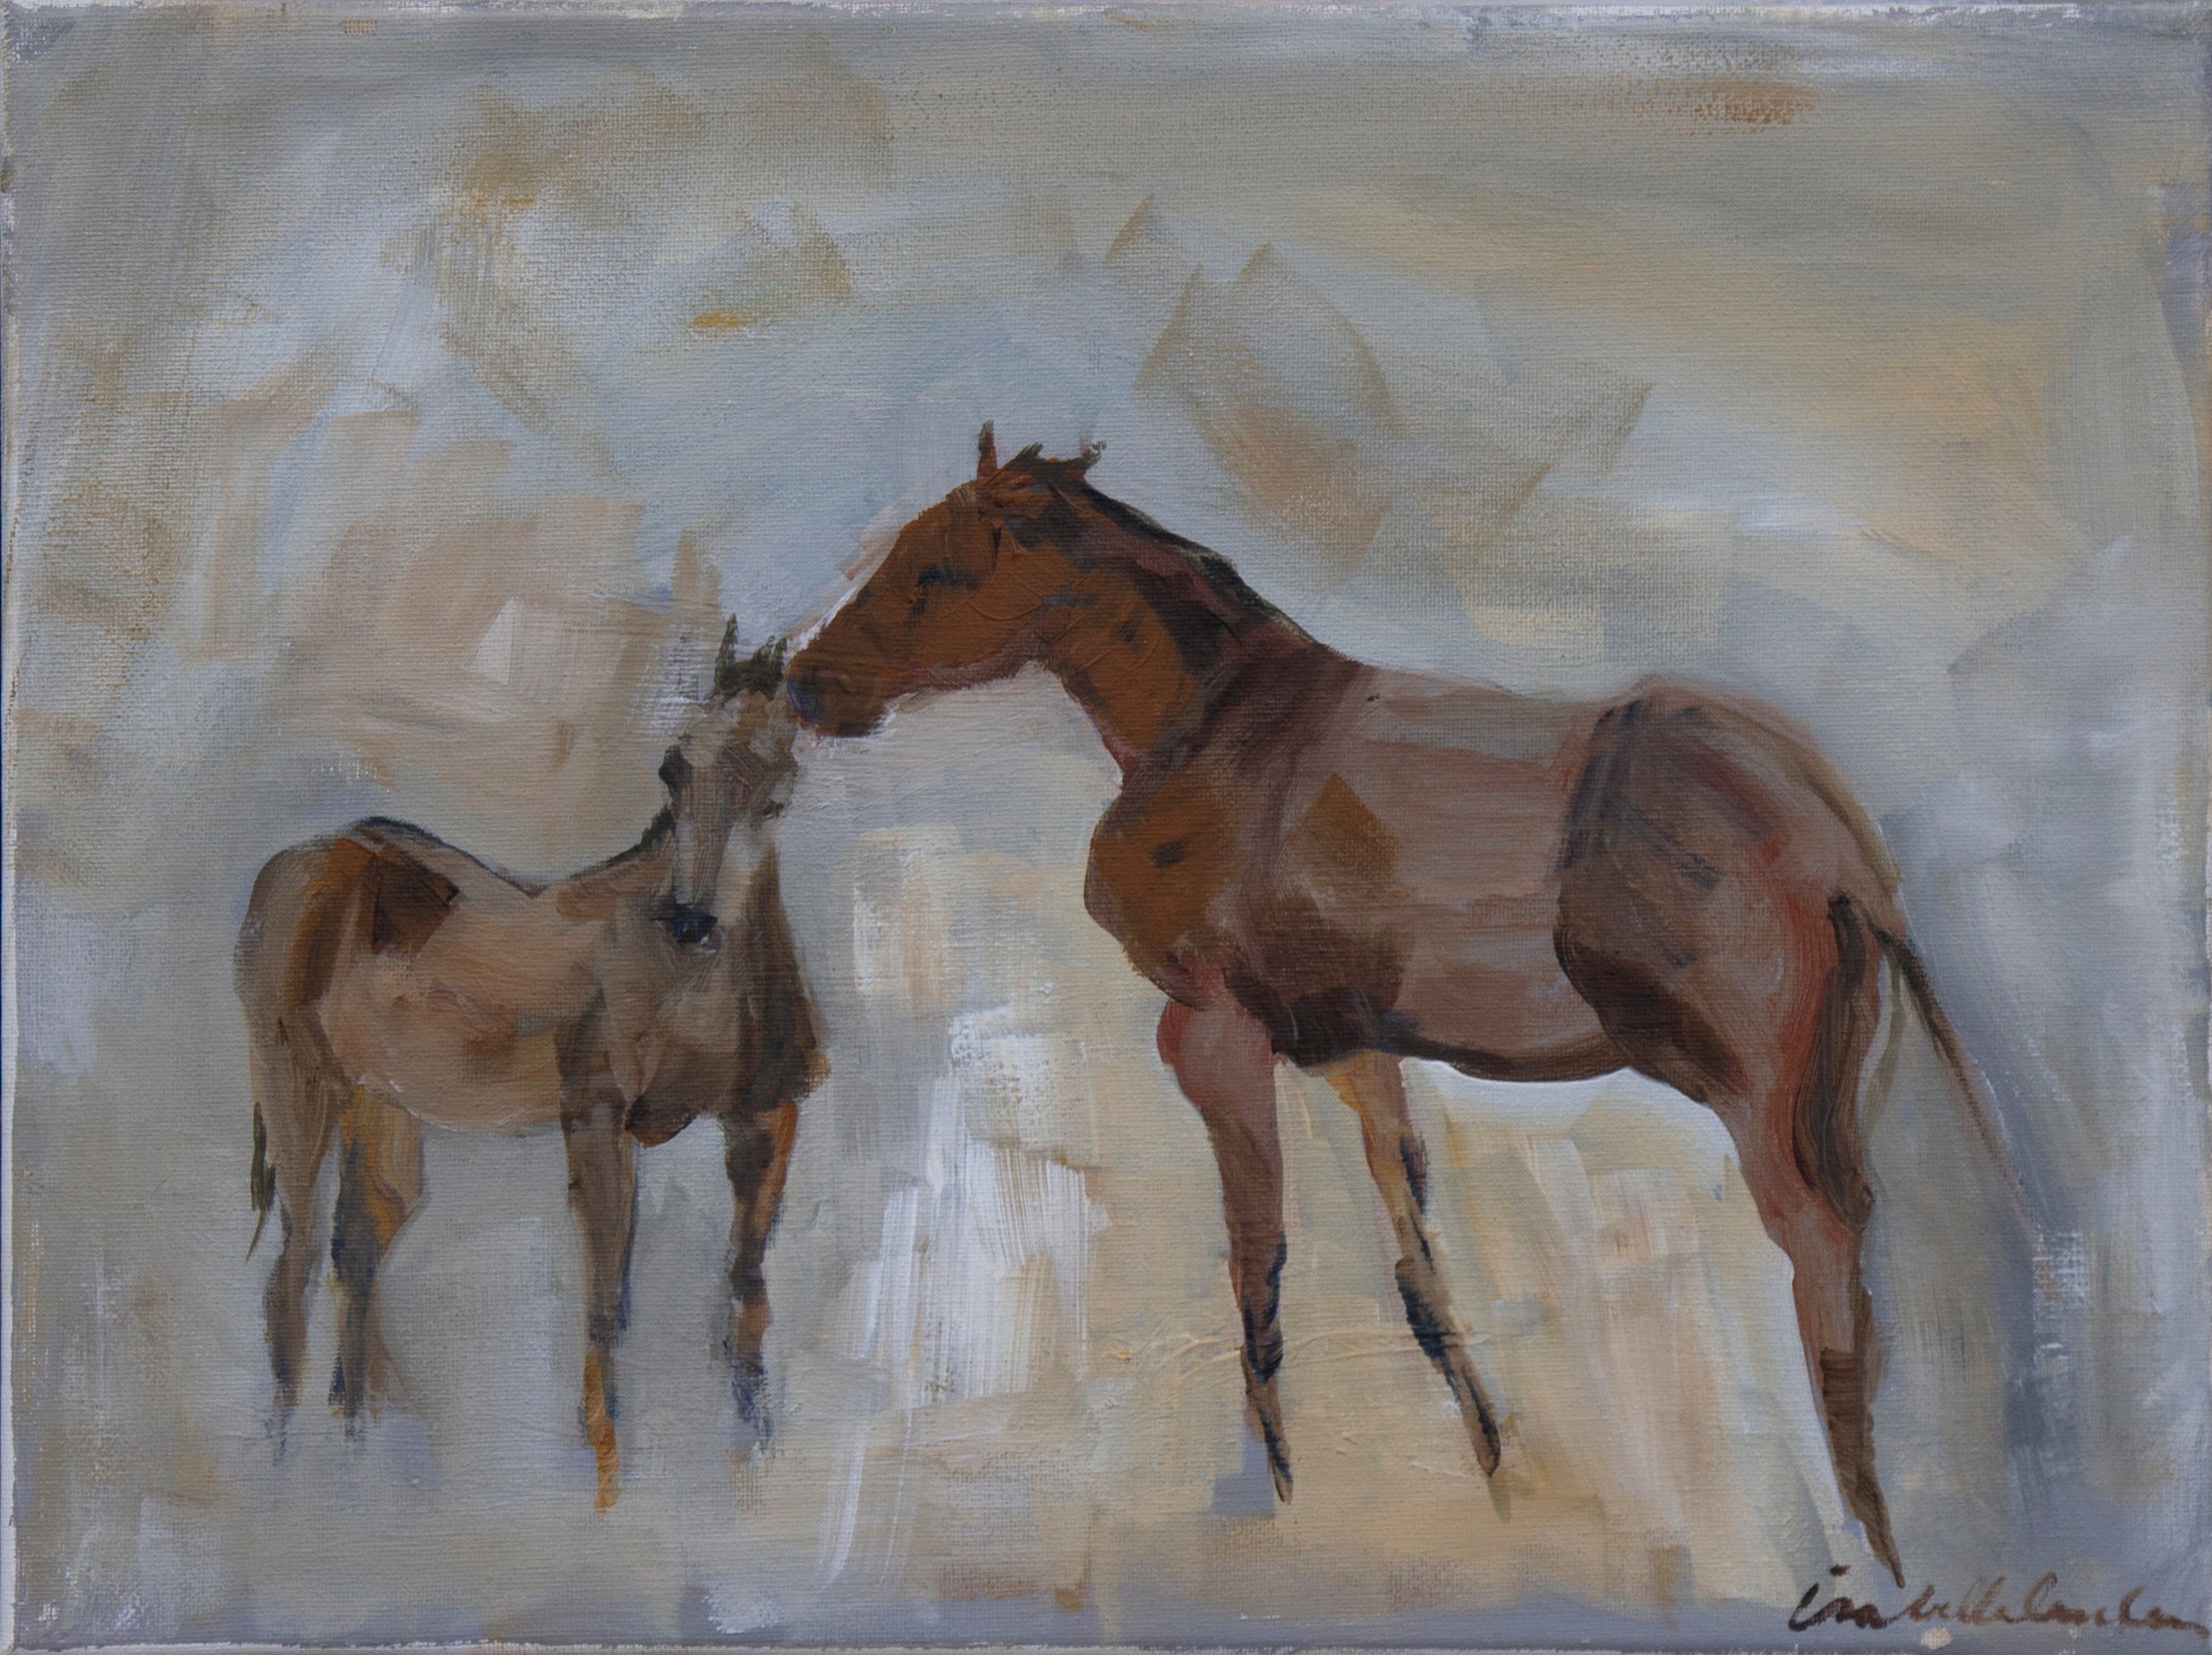 Isabelle Truchon subtly captures the nurture of a mare and her offspring is pure and beautiful. Just as it should be.